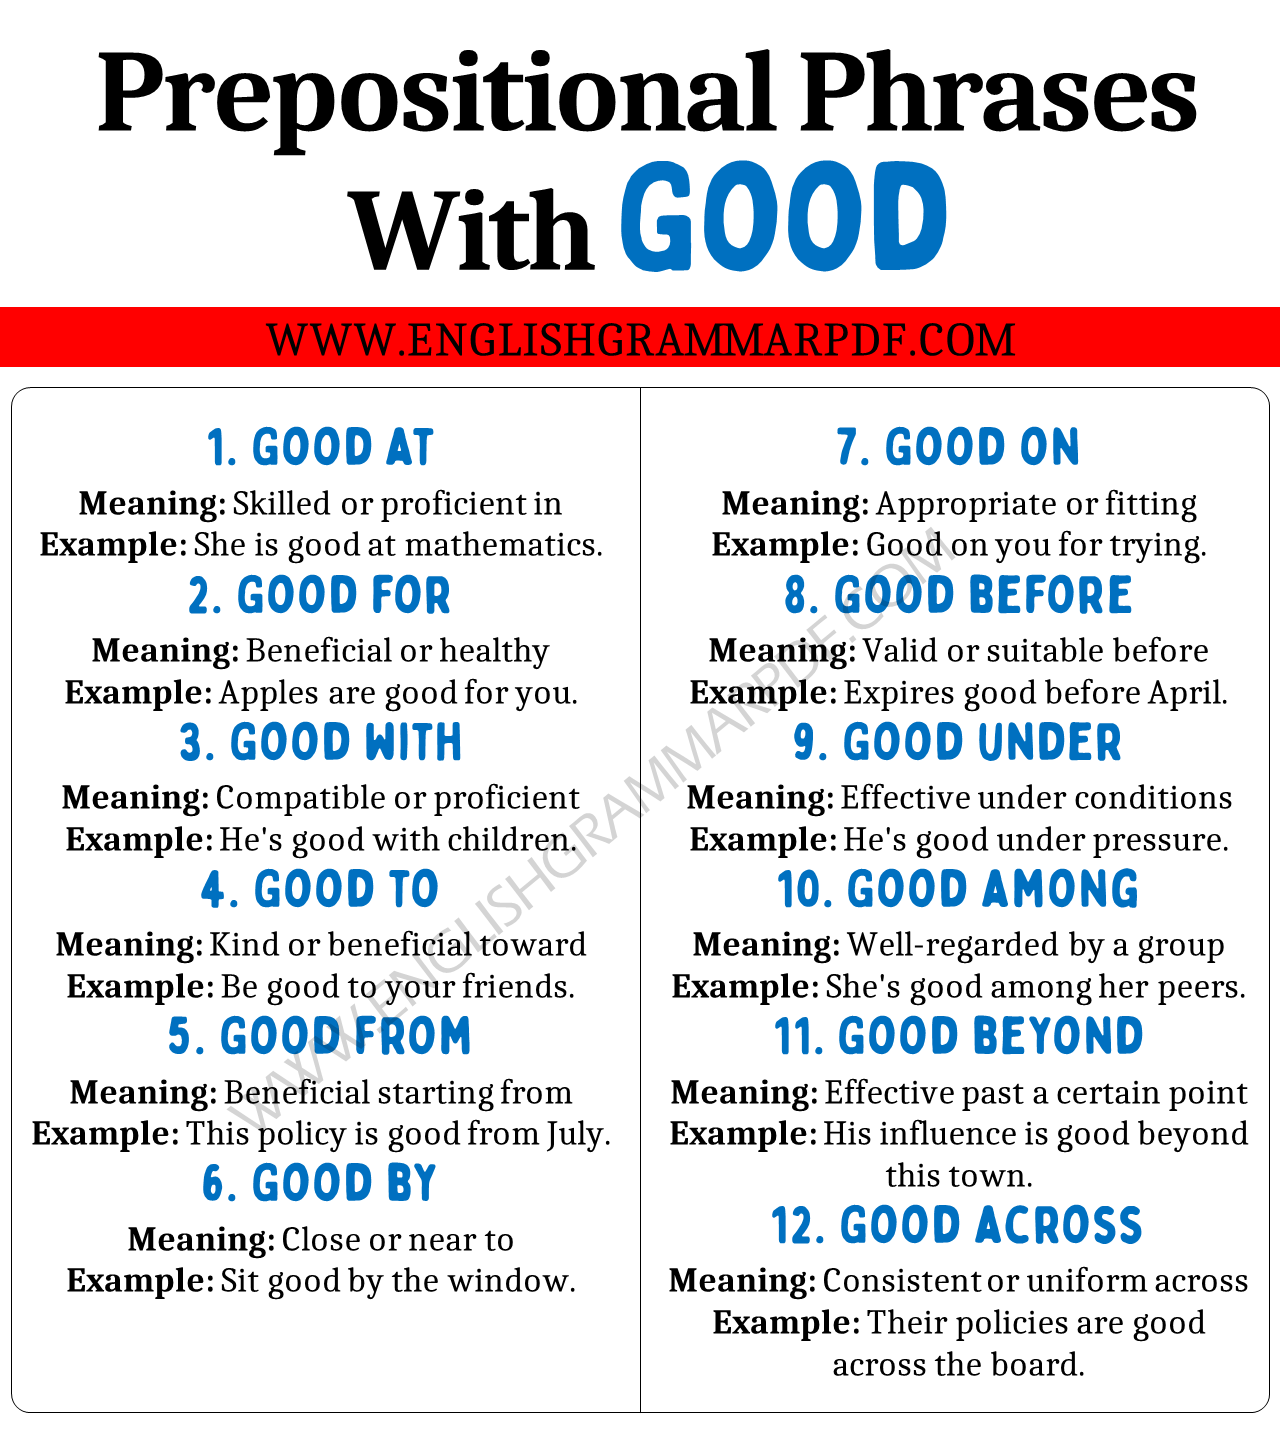 Prepositional Phrases with “Good”